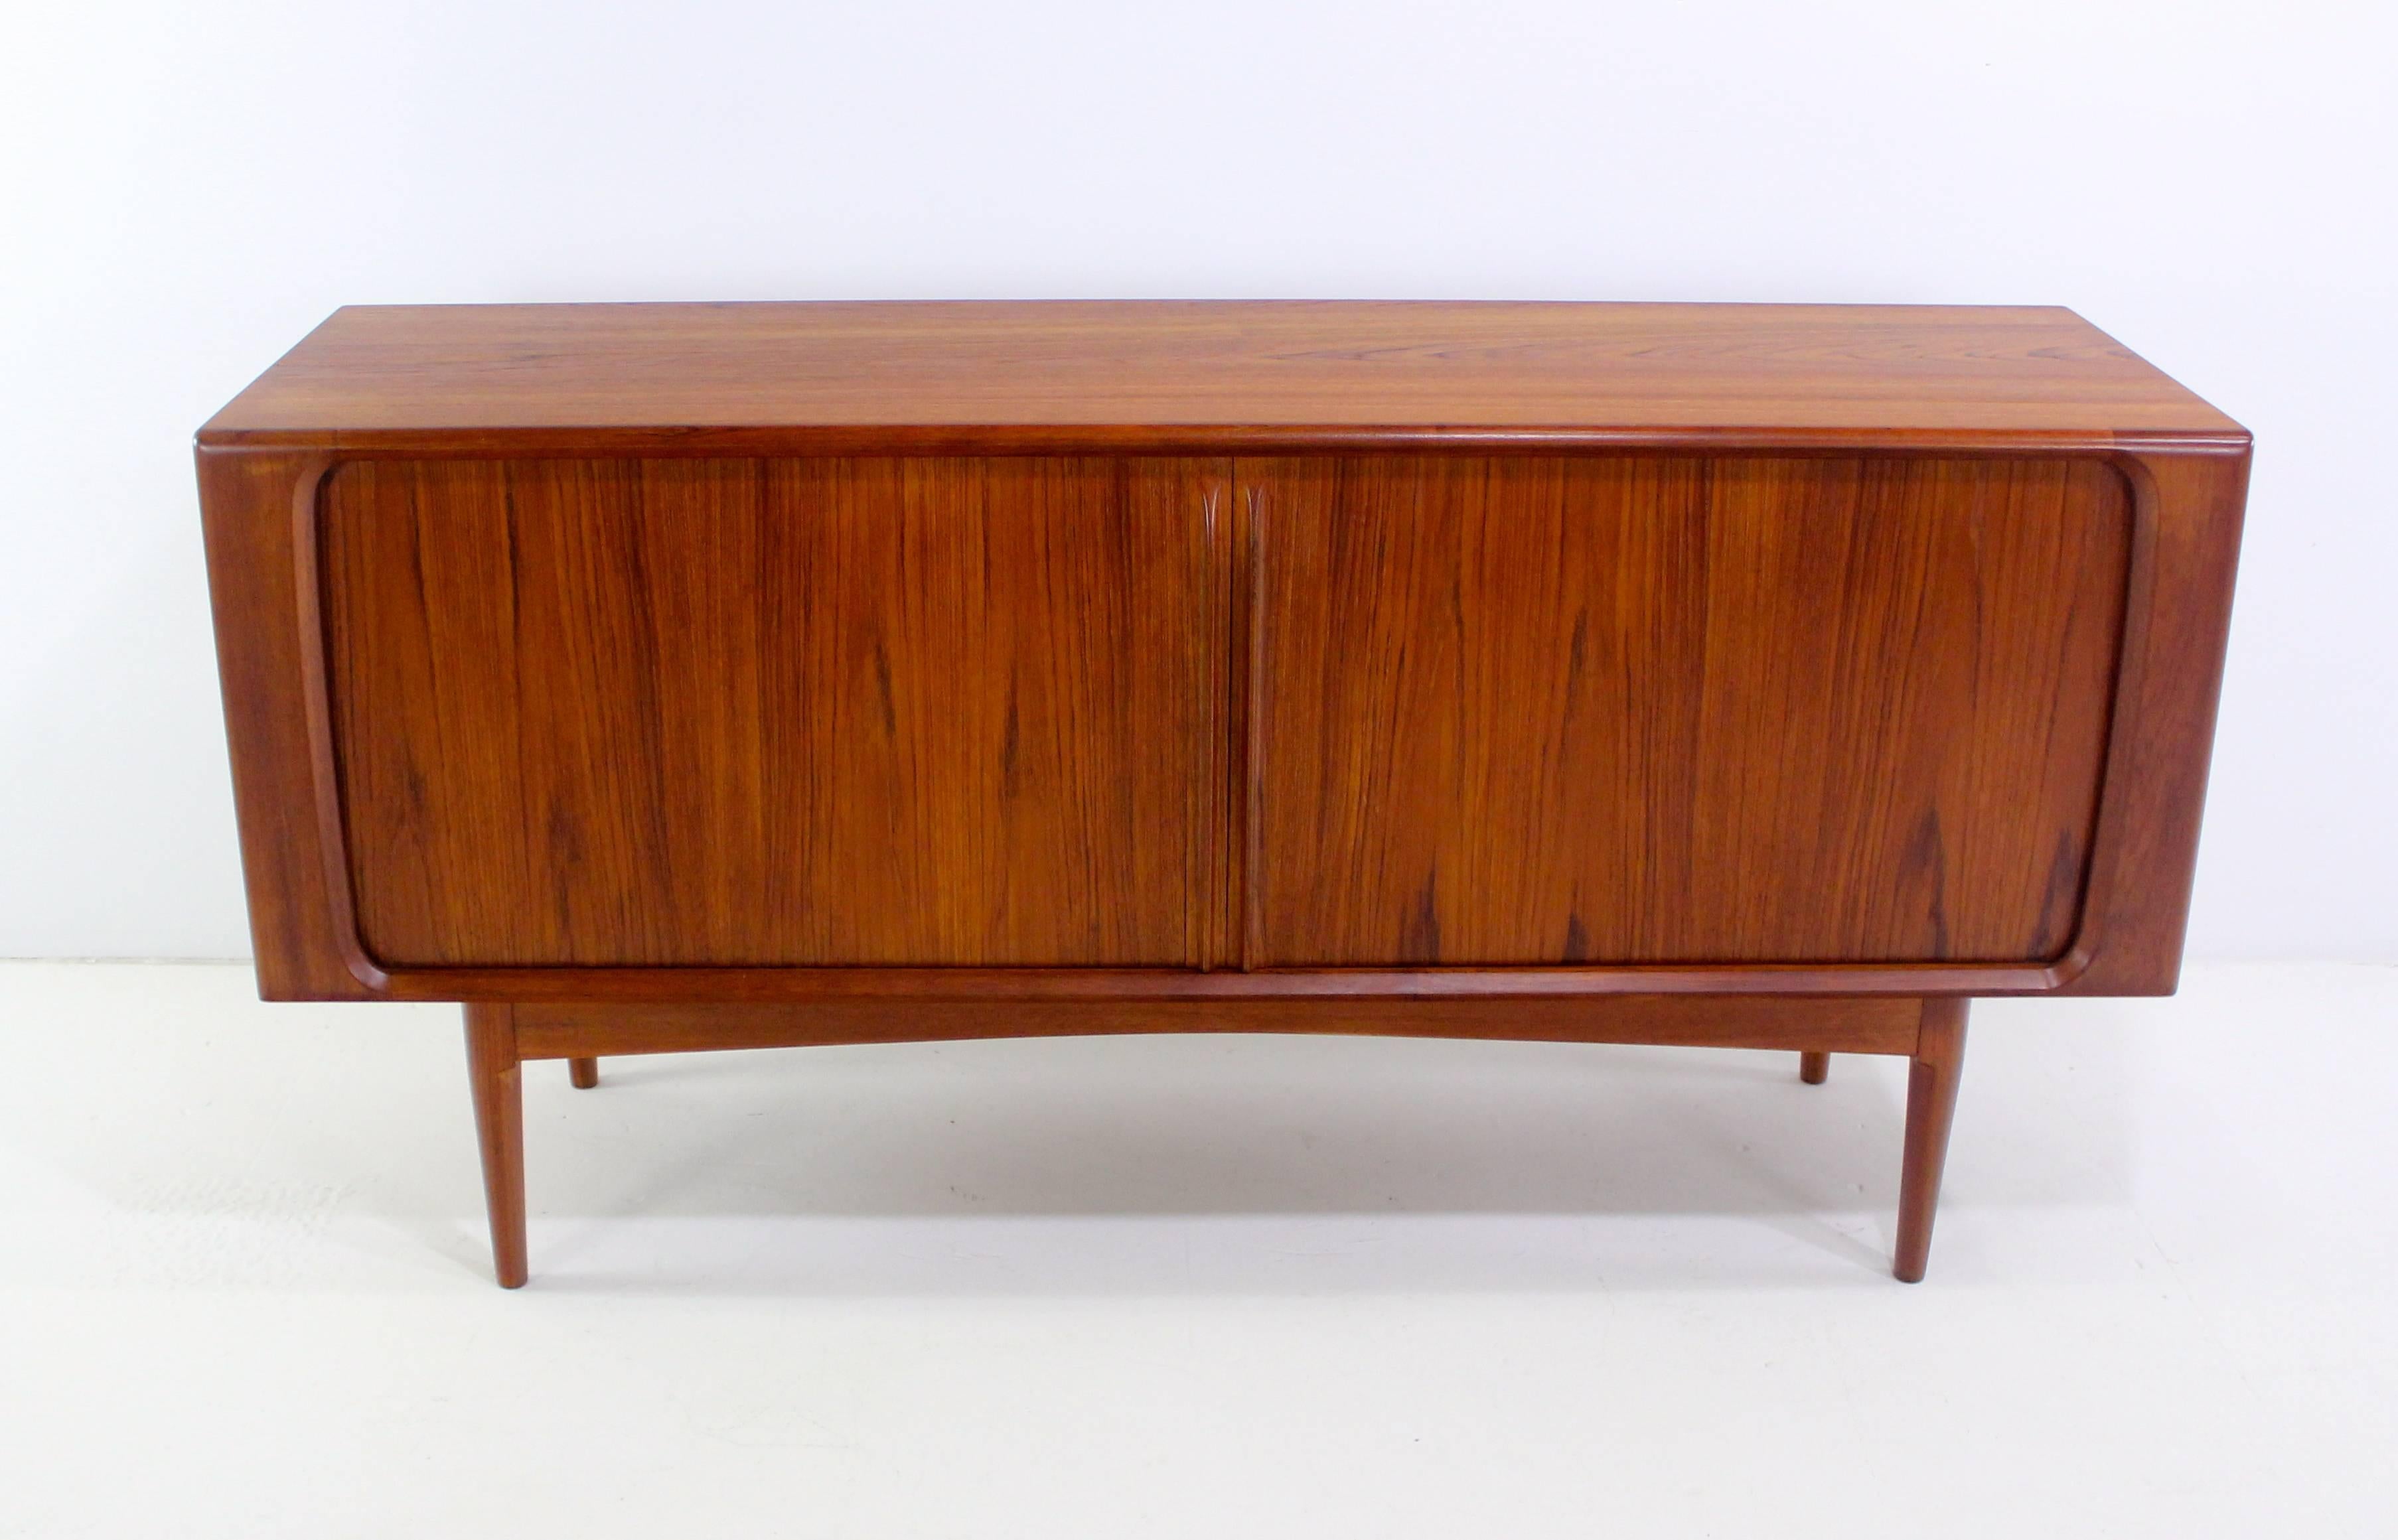 Danish modern credenza designed by Bernhard Pedersen & Son.
Richly grained teak.
Tambour doors with sculptural handles glide open to three removable drawers in the middle, adjustable shelves on each end.
Dramatic dimensional Silhouette from every